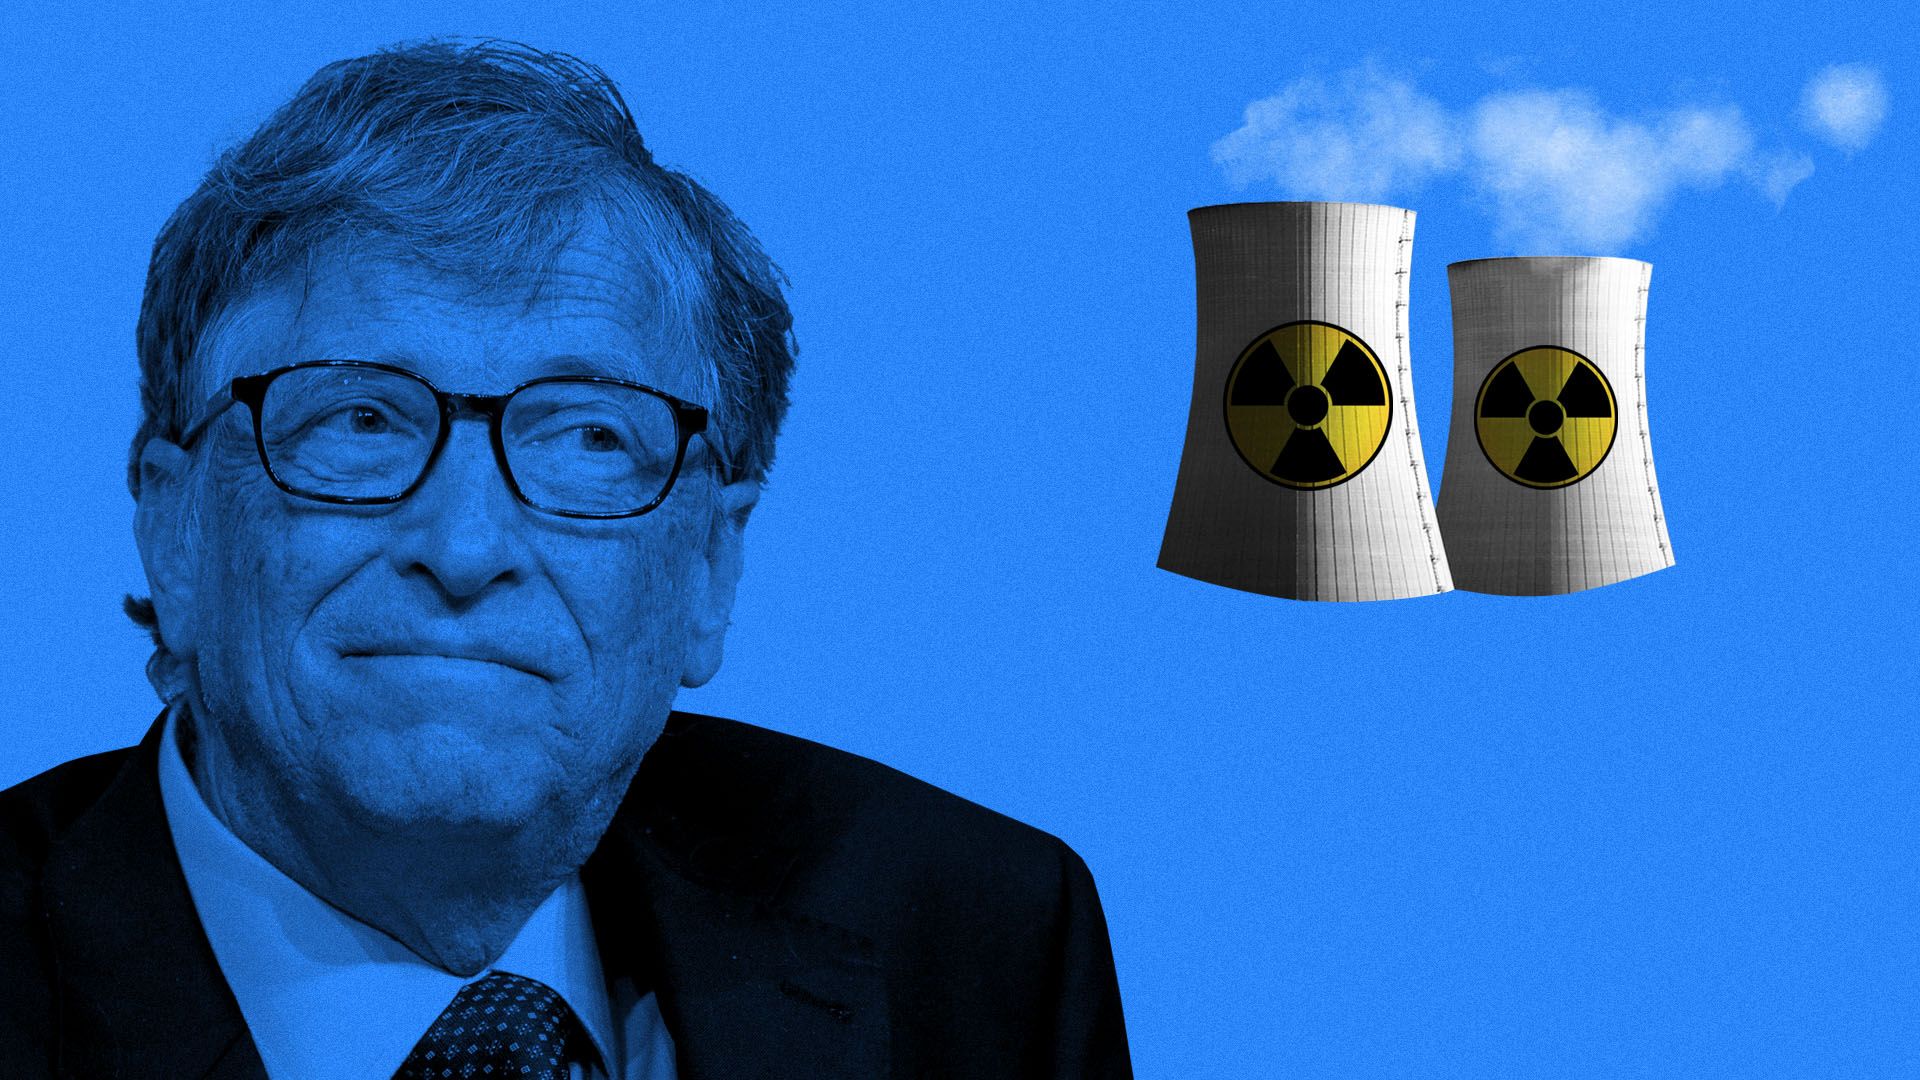 Illustration of Bill Gates considering a small nuclear reactor